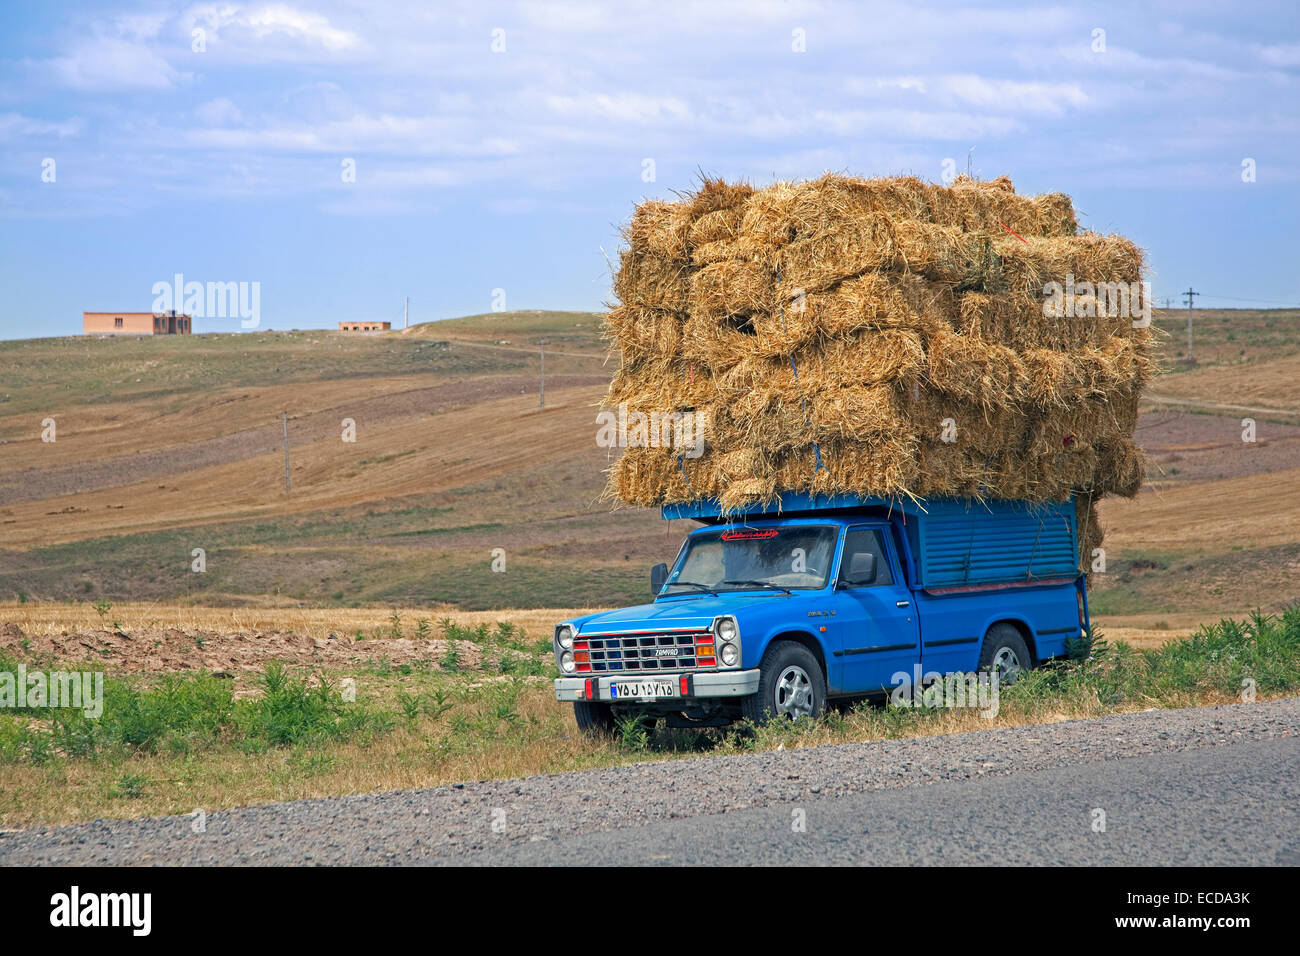 Blue pickup truck heavily loaded with hay bales in rural Iran Stock Photo